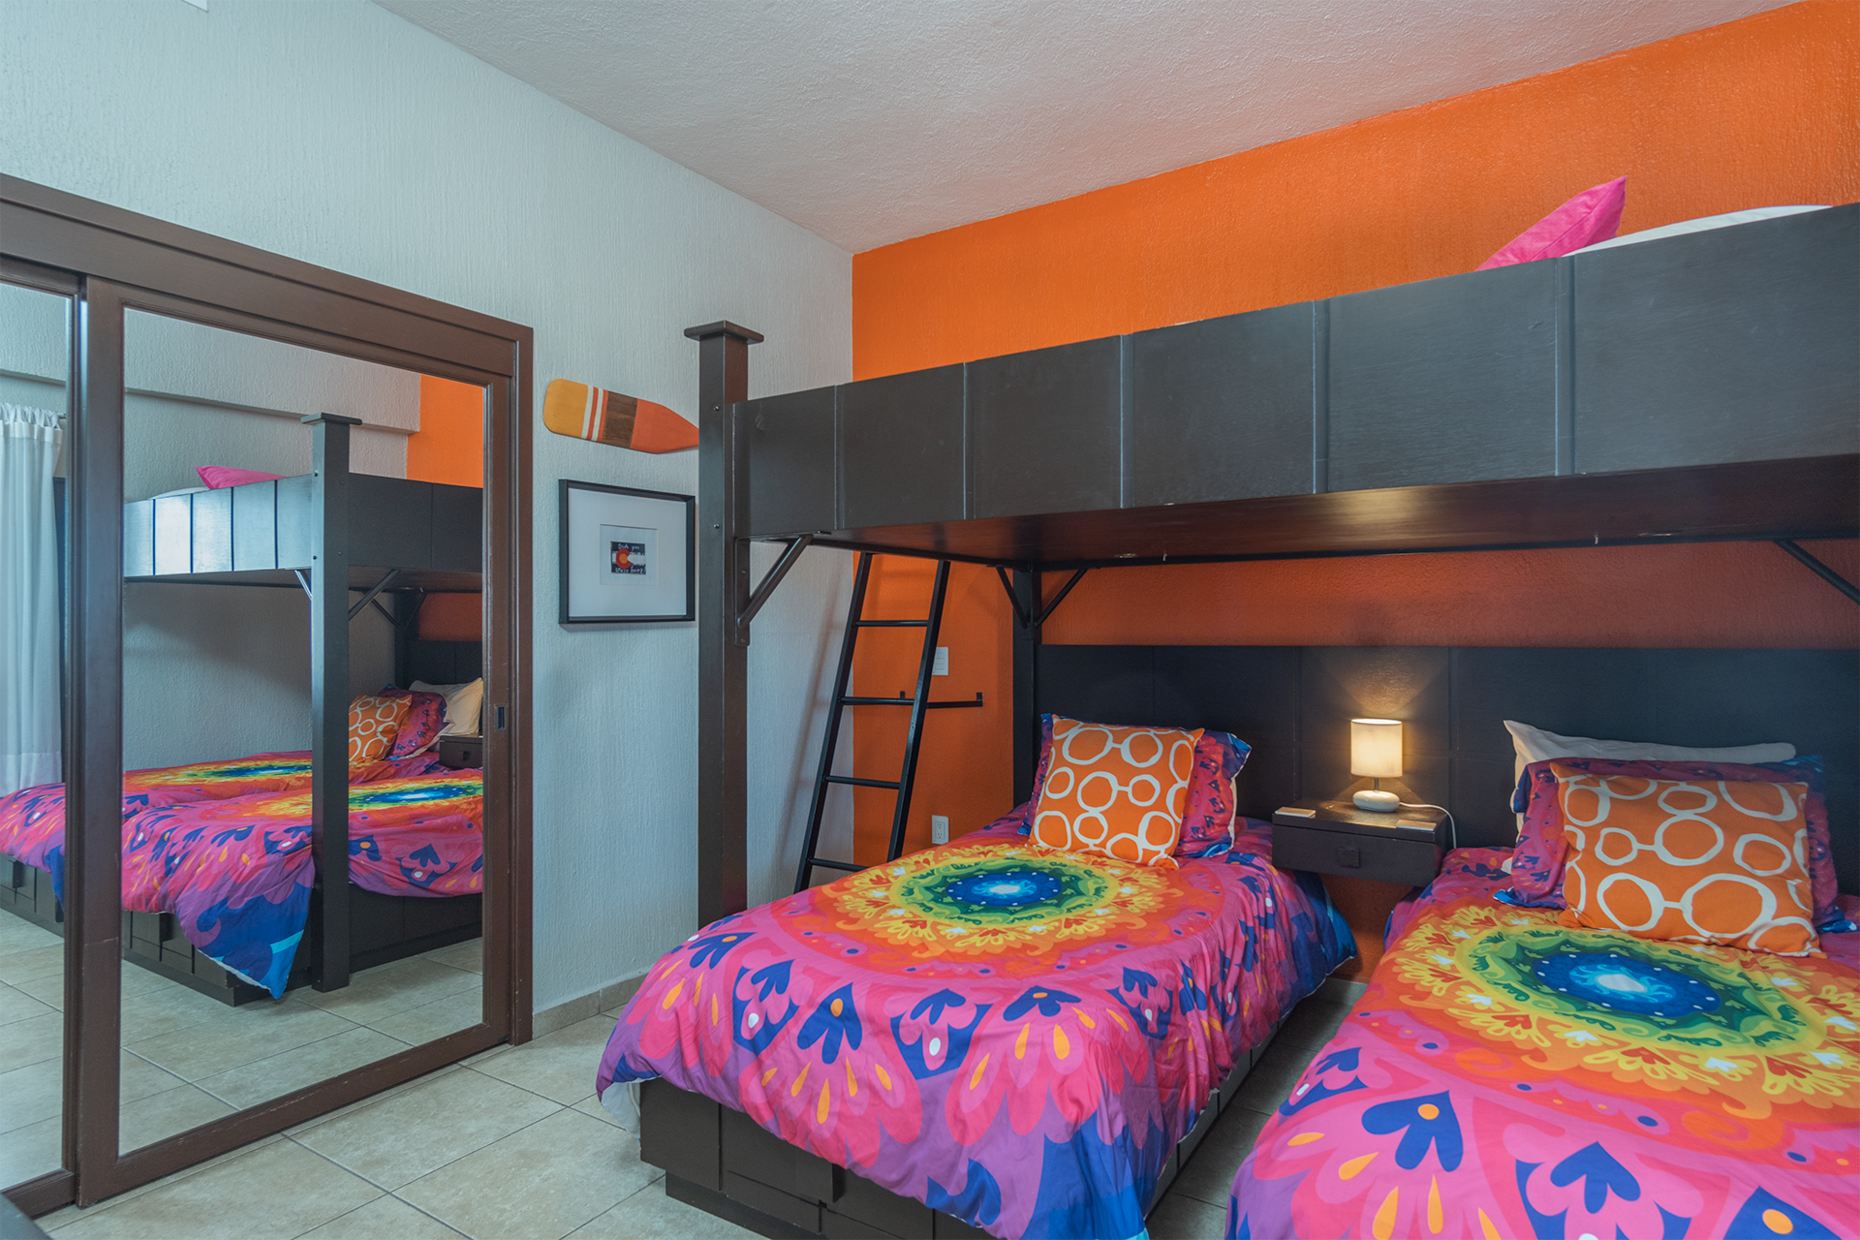 The third bedroom features these are Gand fun bunk beds.